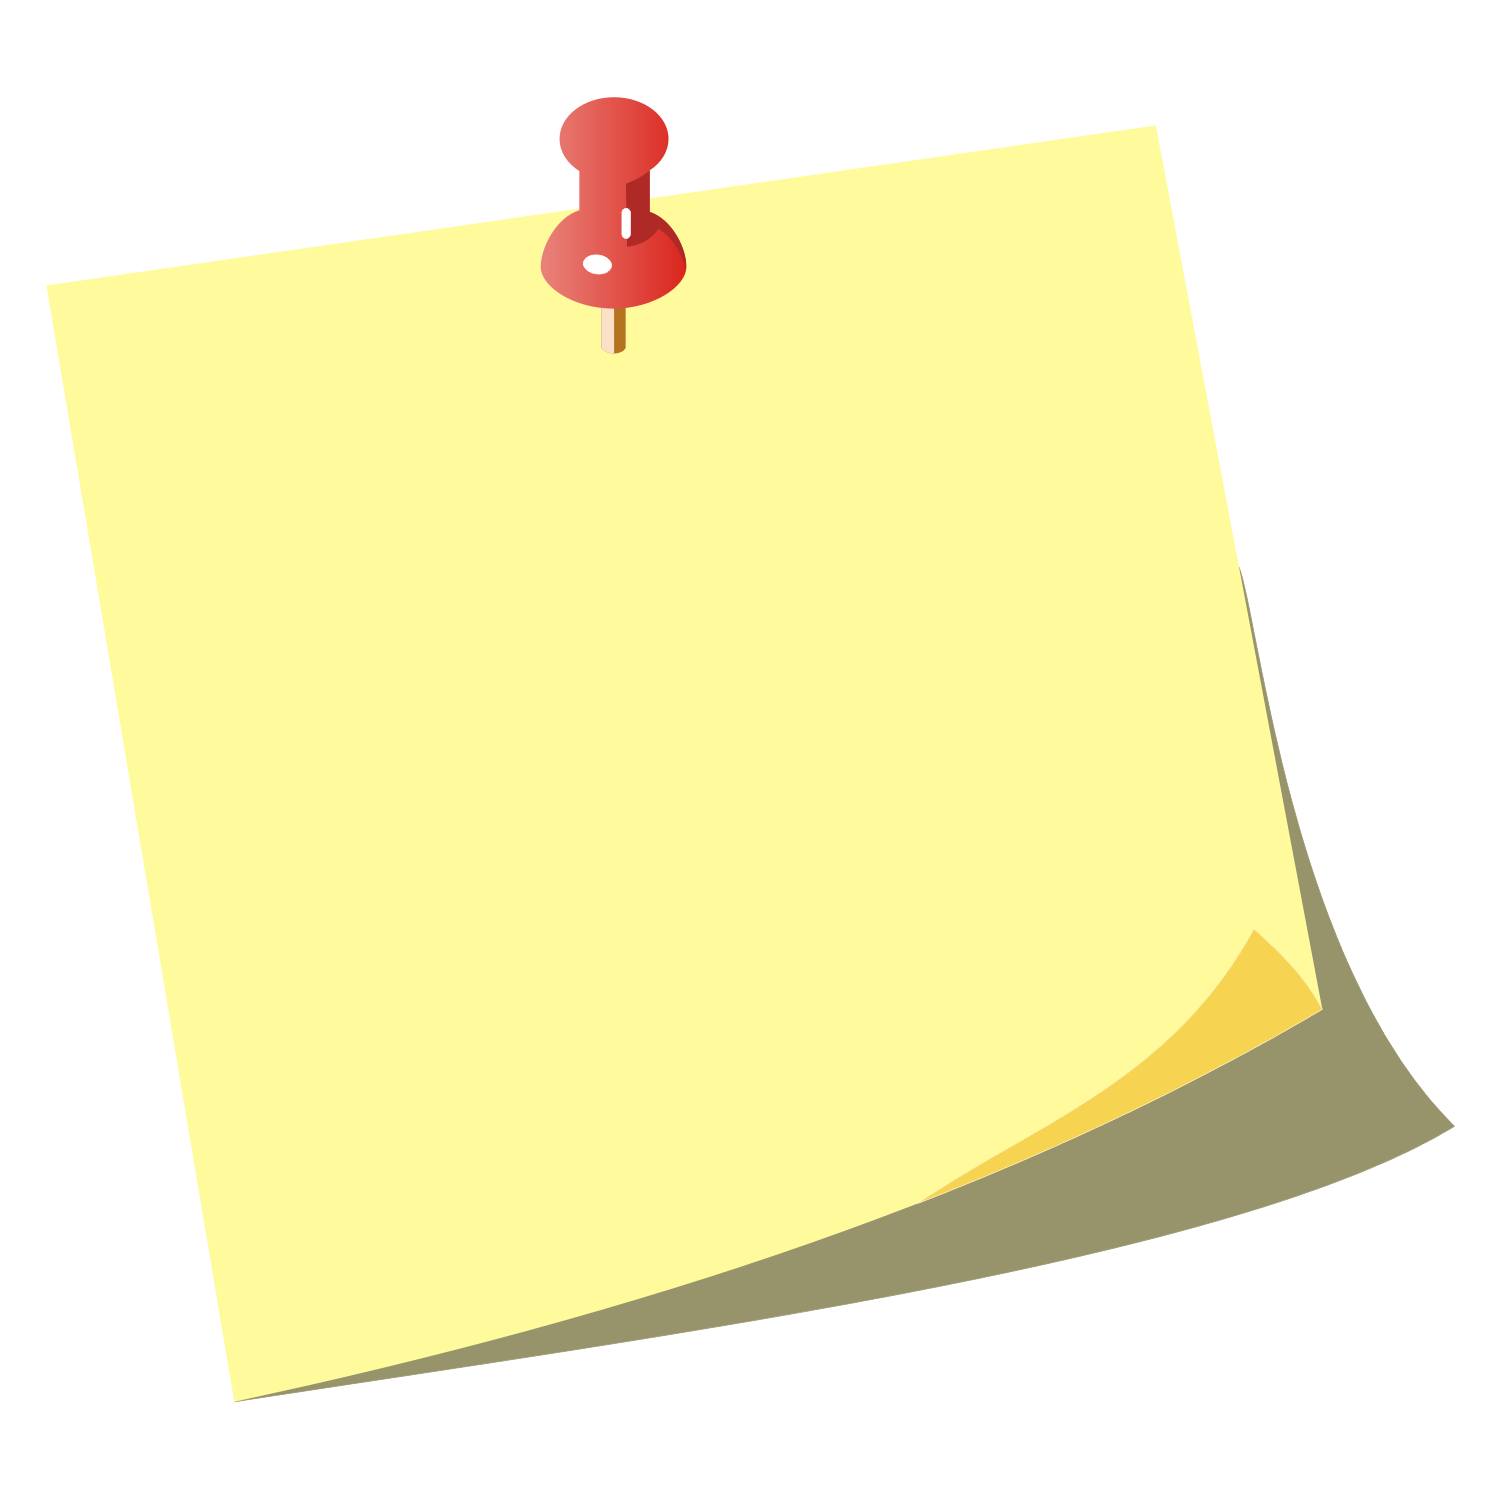 11 Blank Note Paper Free Cliparts That You Can Download To You